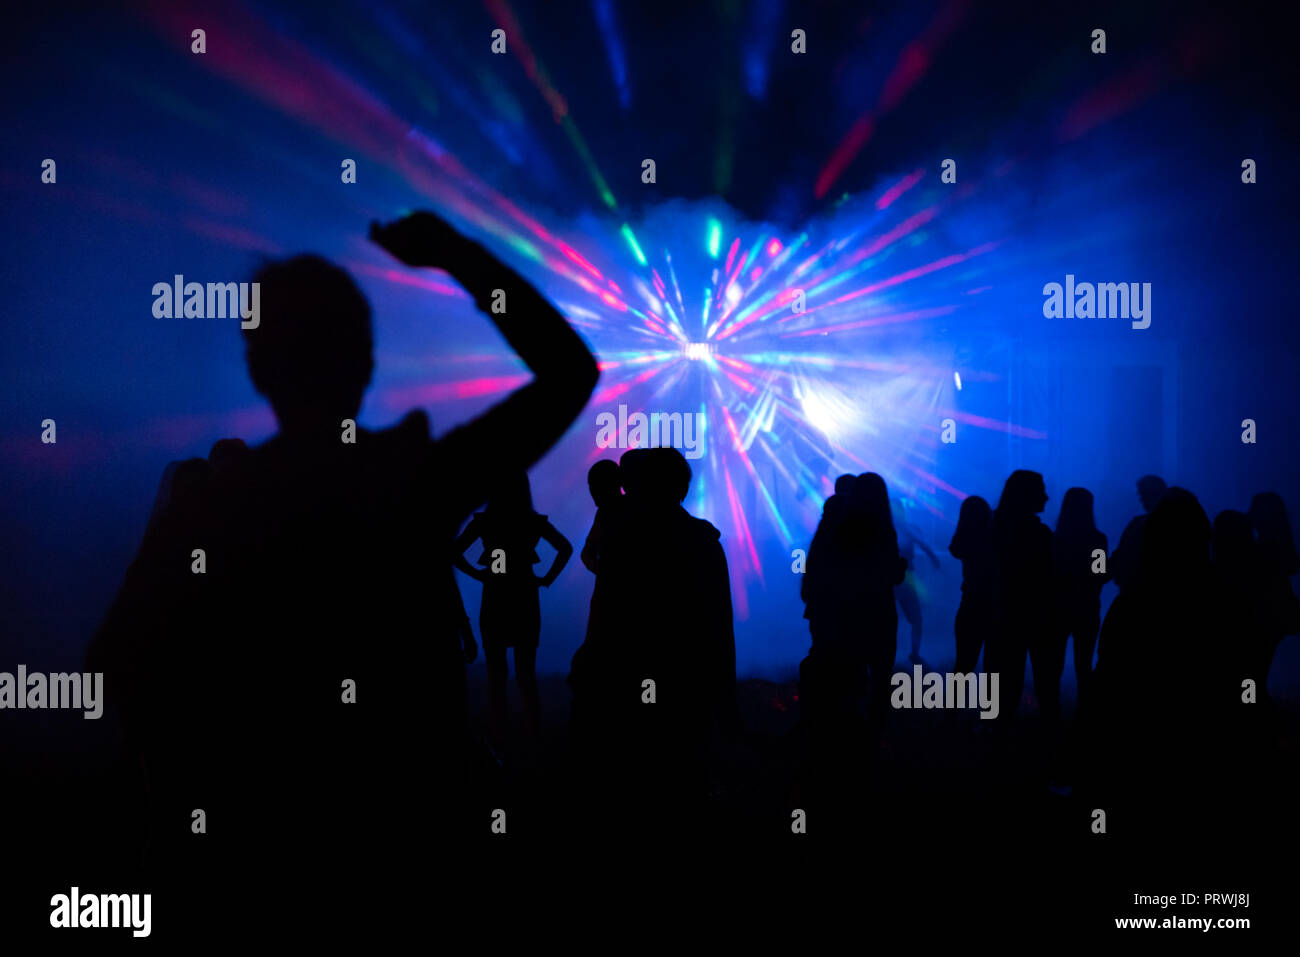 Abstract blurry background, silhouettes of people at open air party Stock Photo